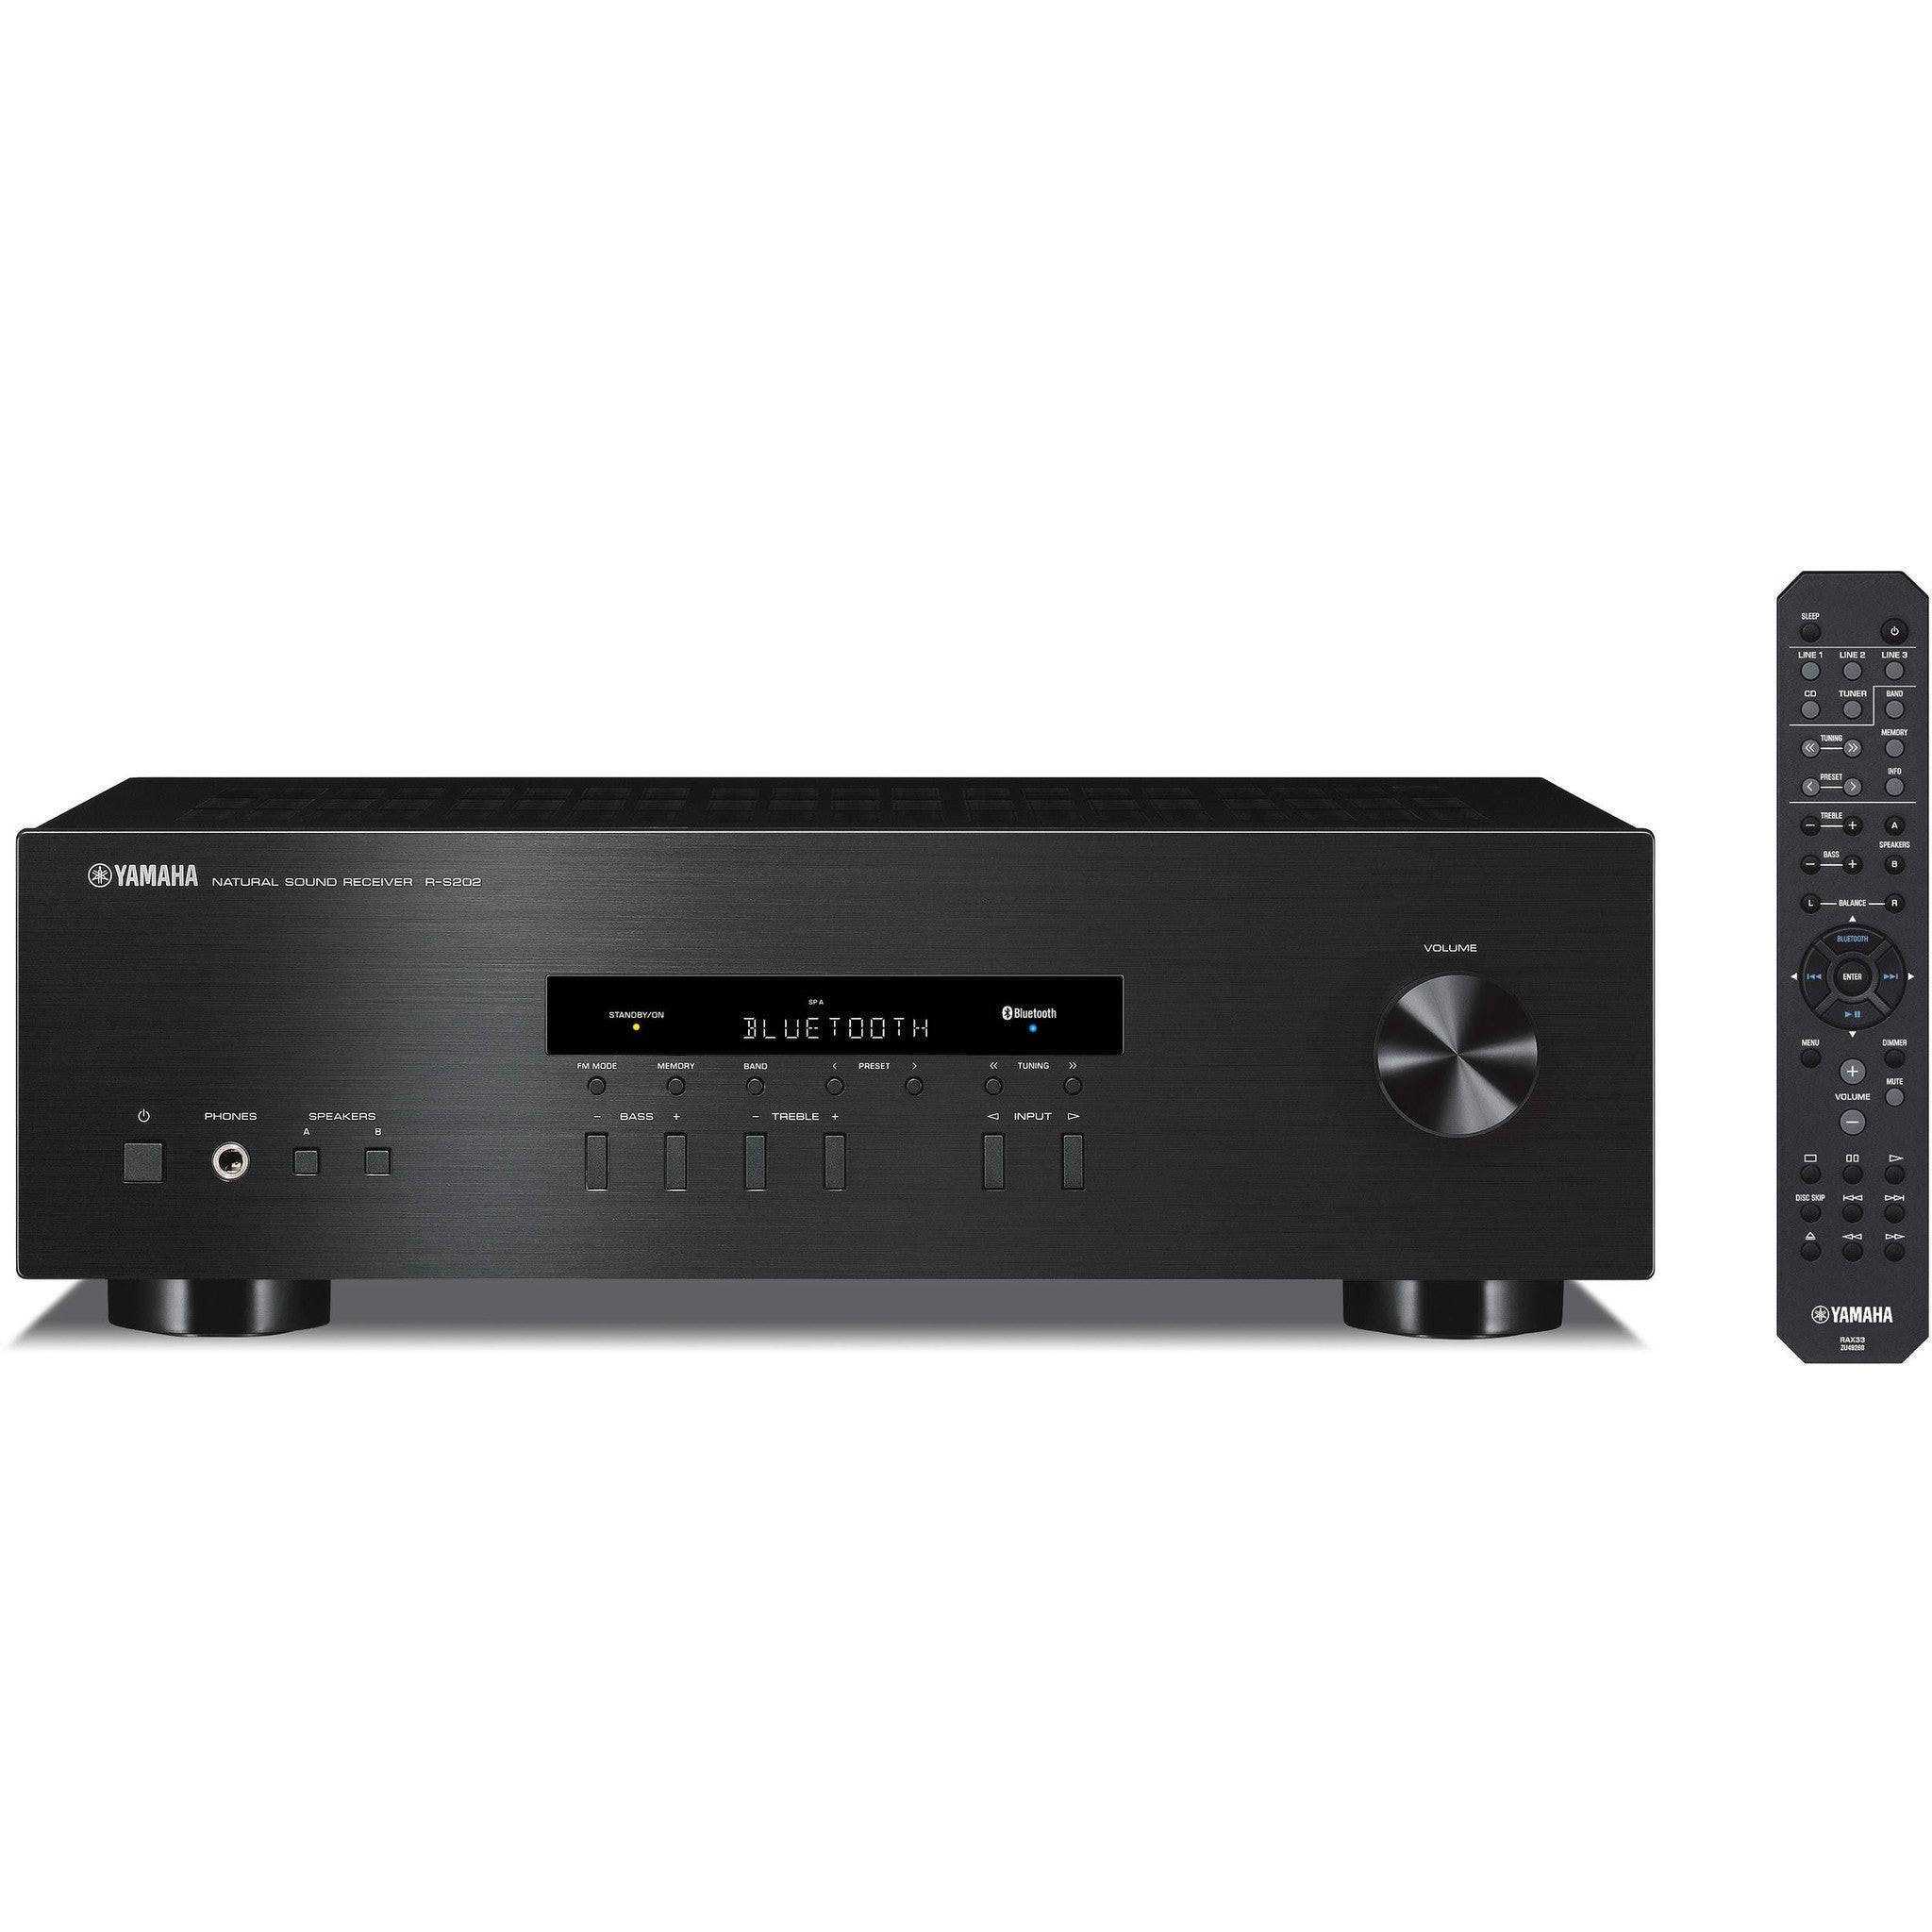 Yamaha R-s202 Stereo Receiver